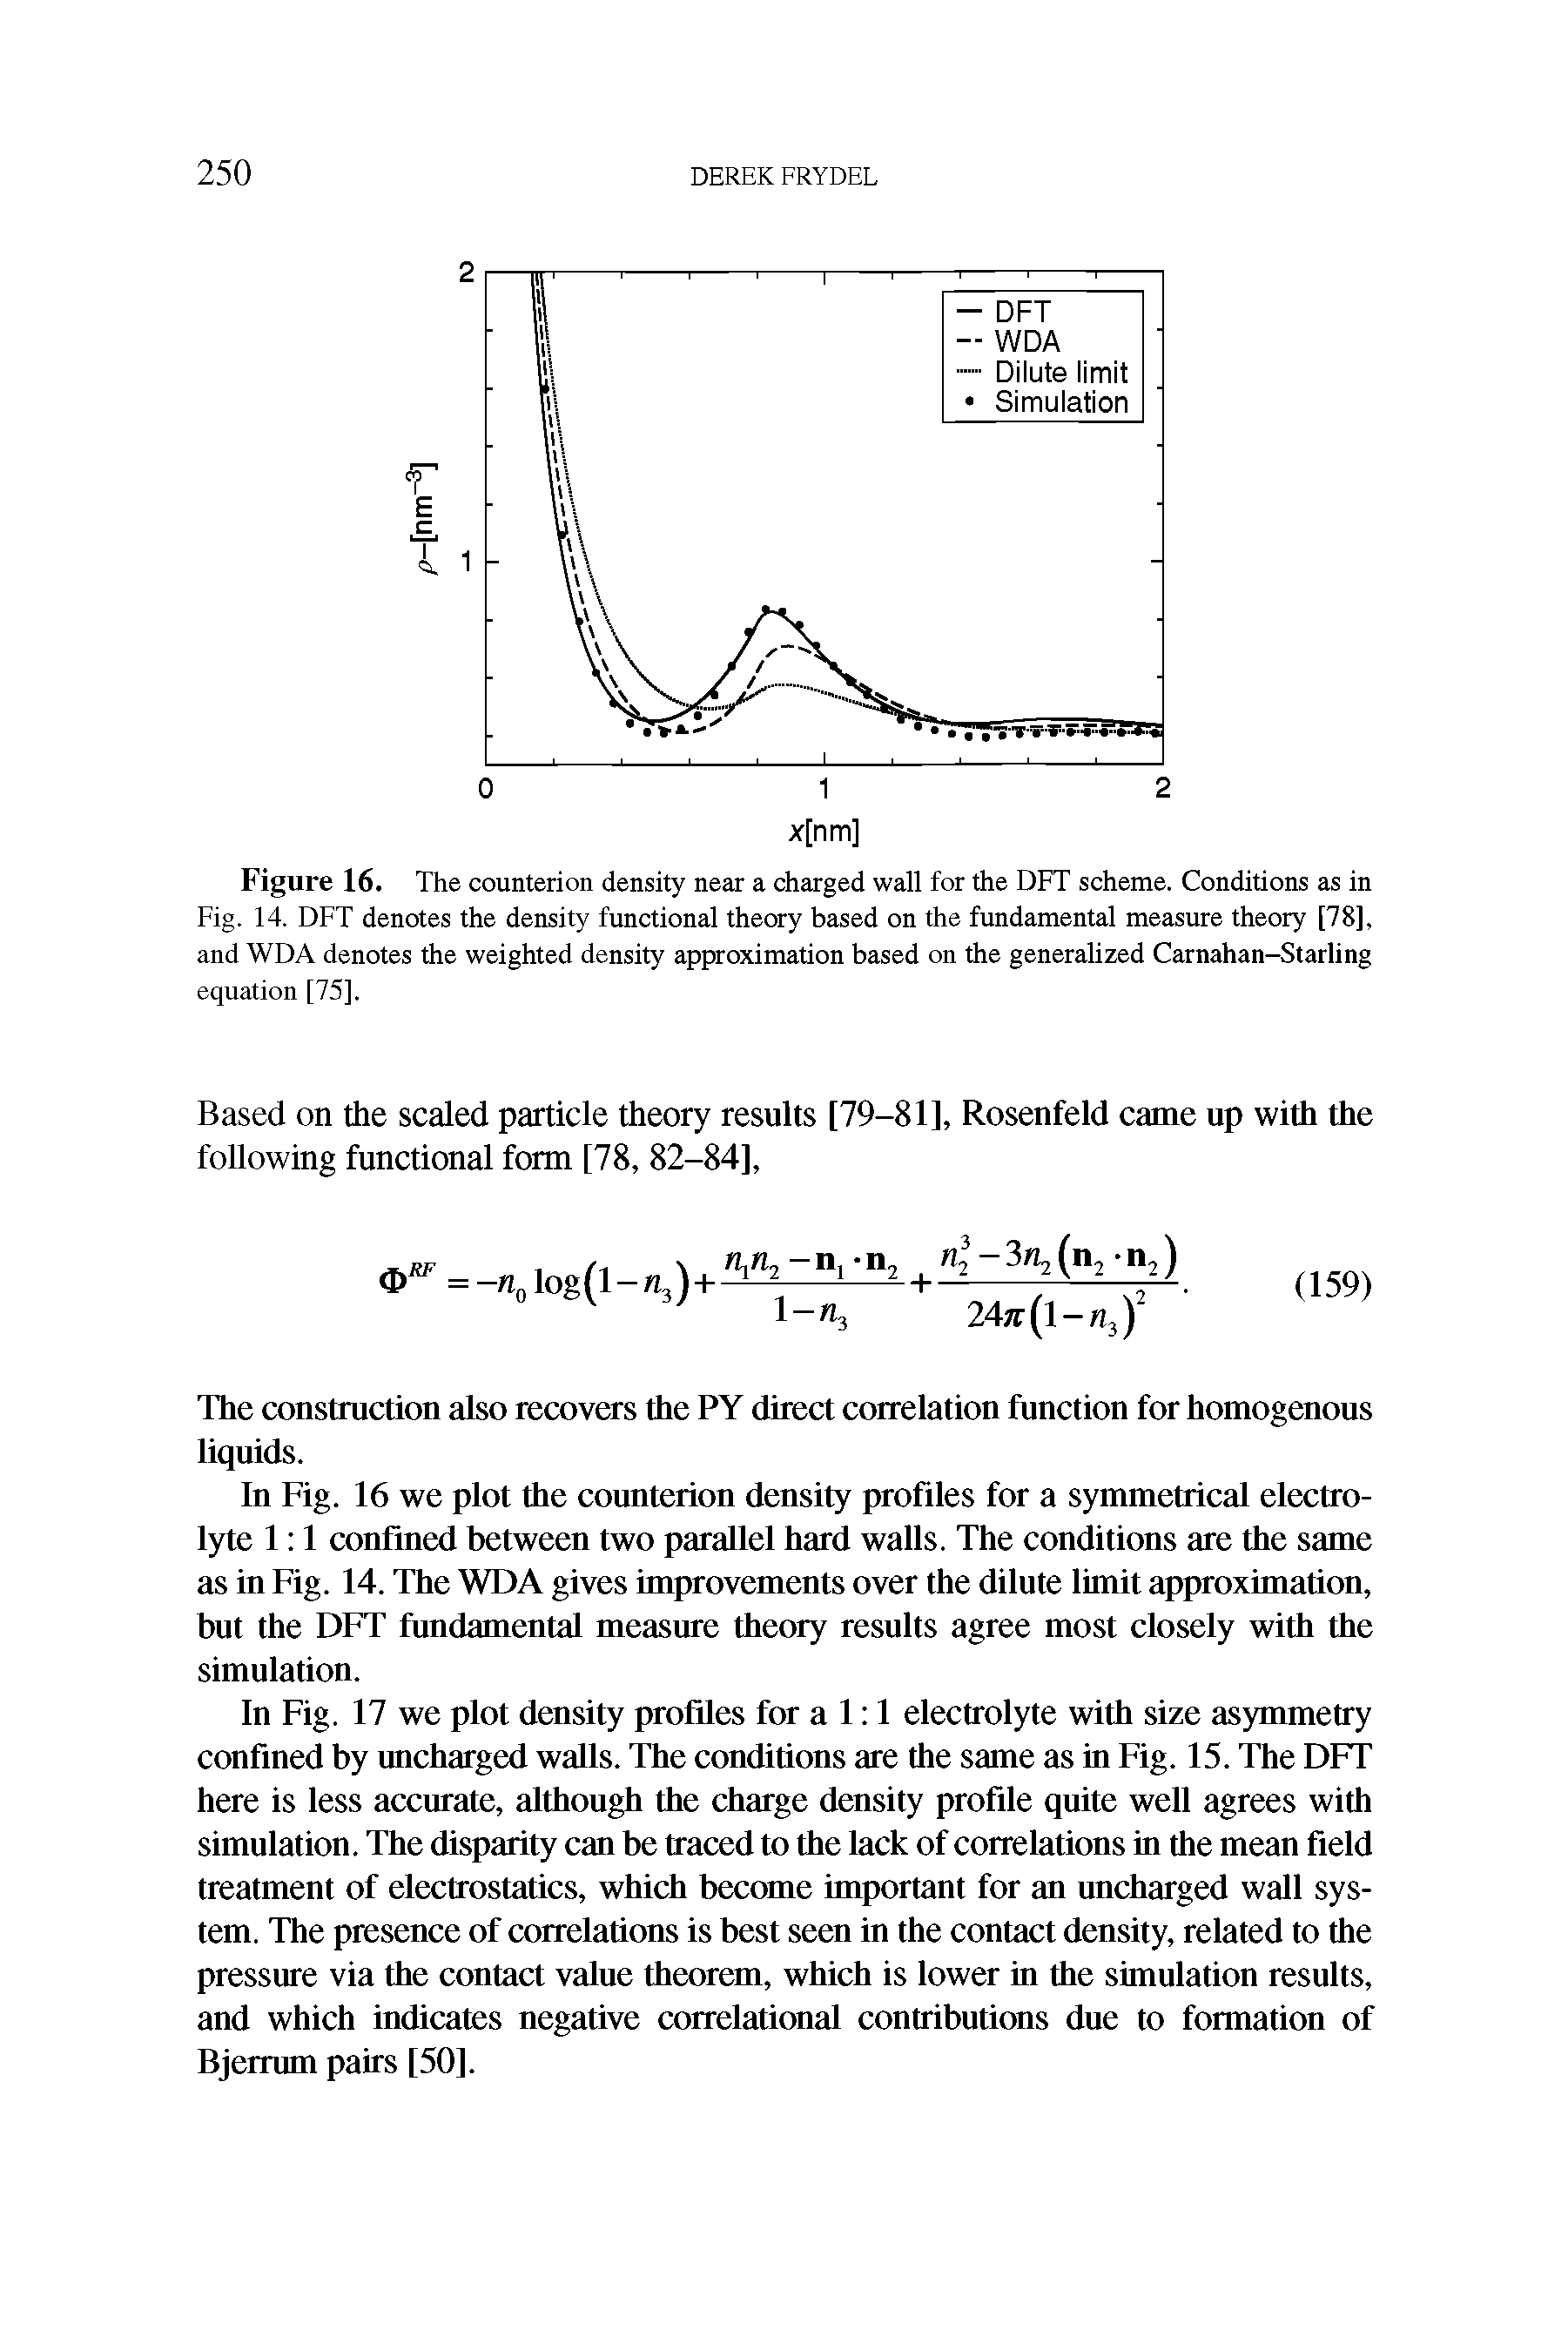 Figure 16. The counterion density near a charged wall for the DFT scheme. Conditions as in Fig. 14. DFT denotes the density functional theory based on the fundamental measure theory [78], and WDA denotes the weighted density approximation based on the generalized Carnahan-Starling equation [75].